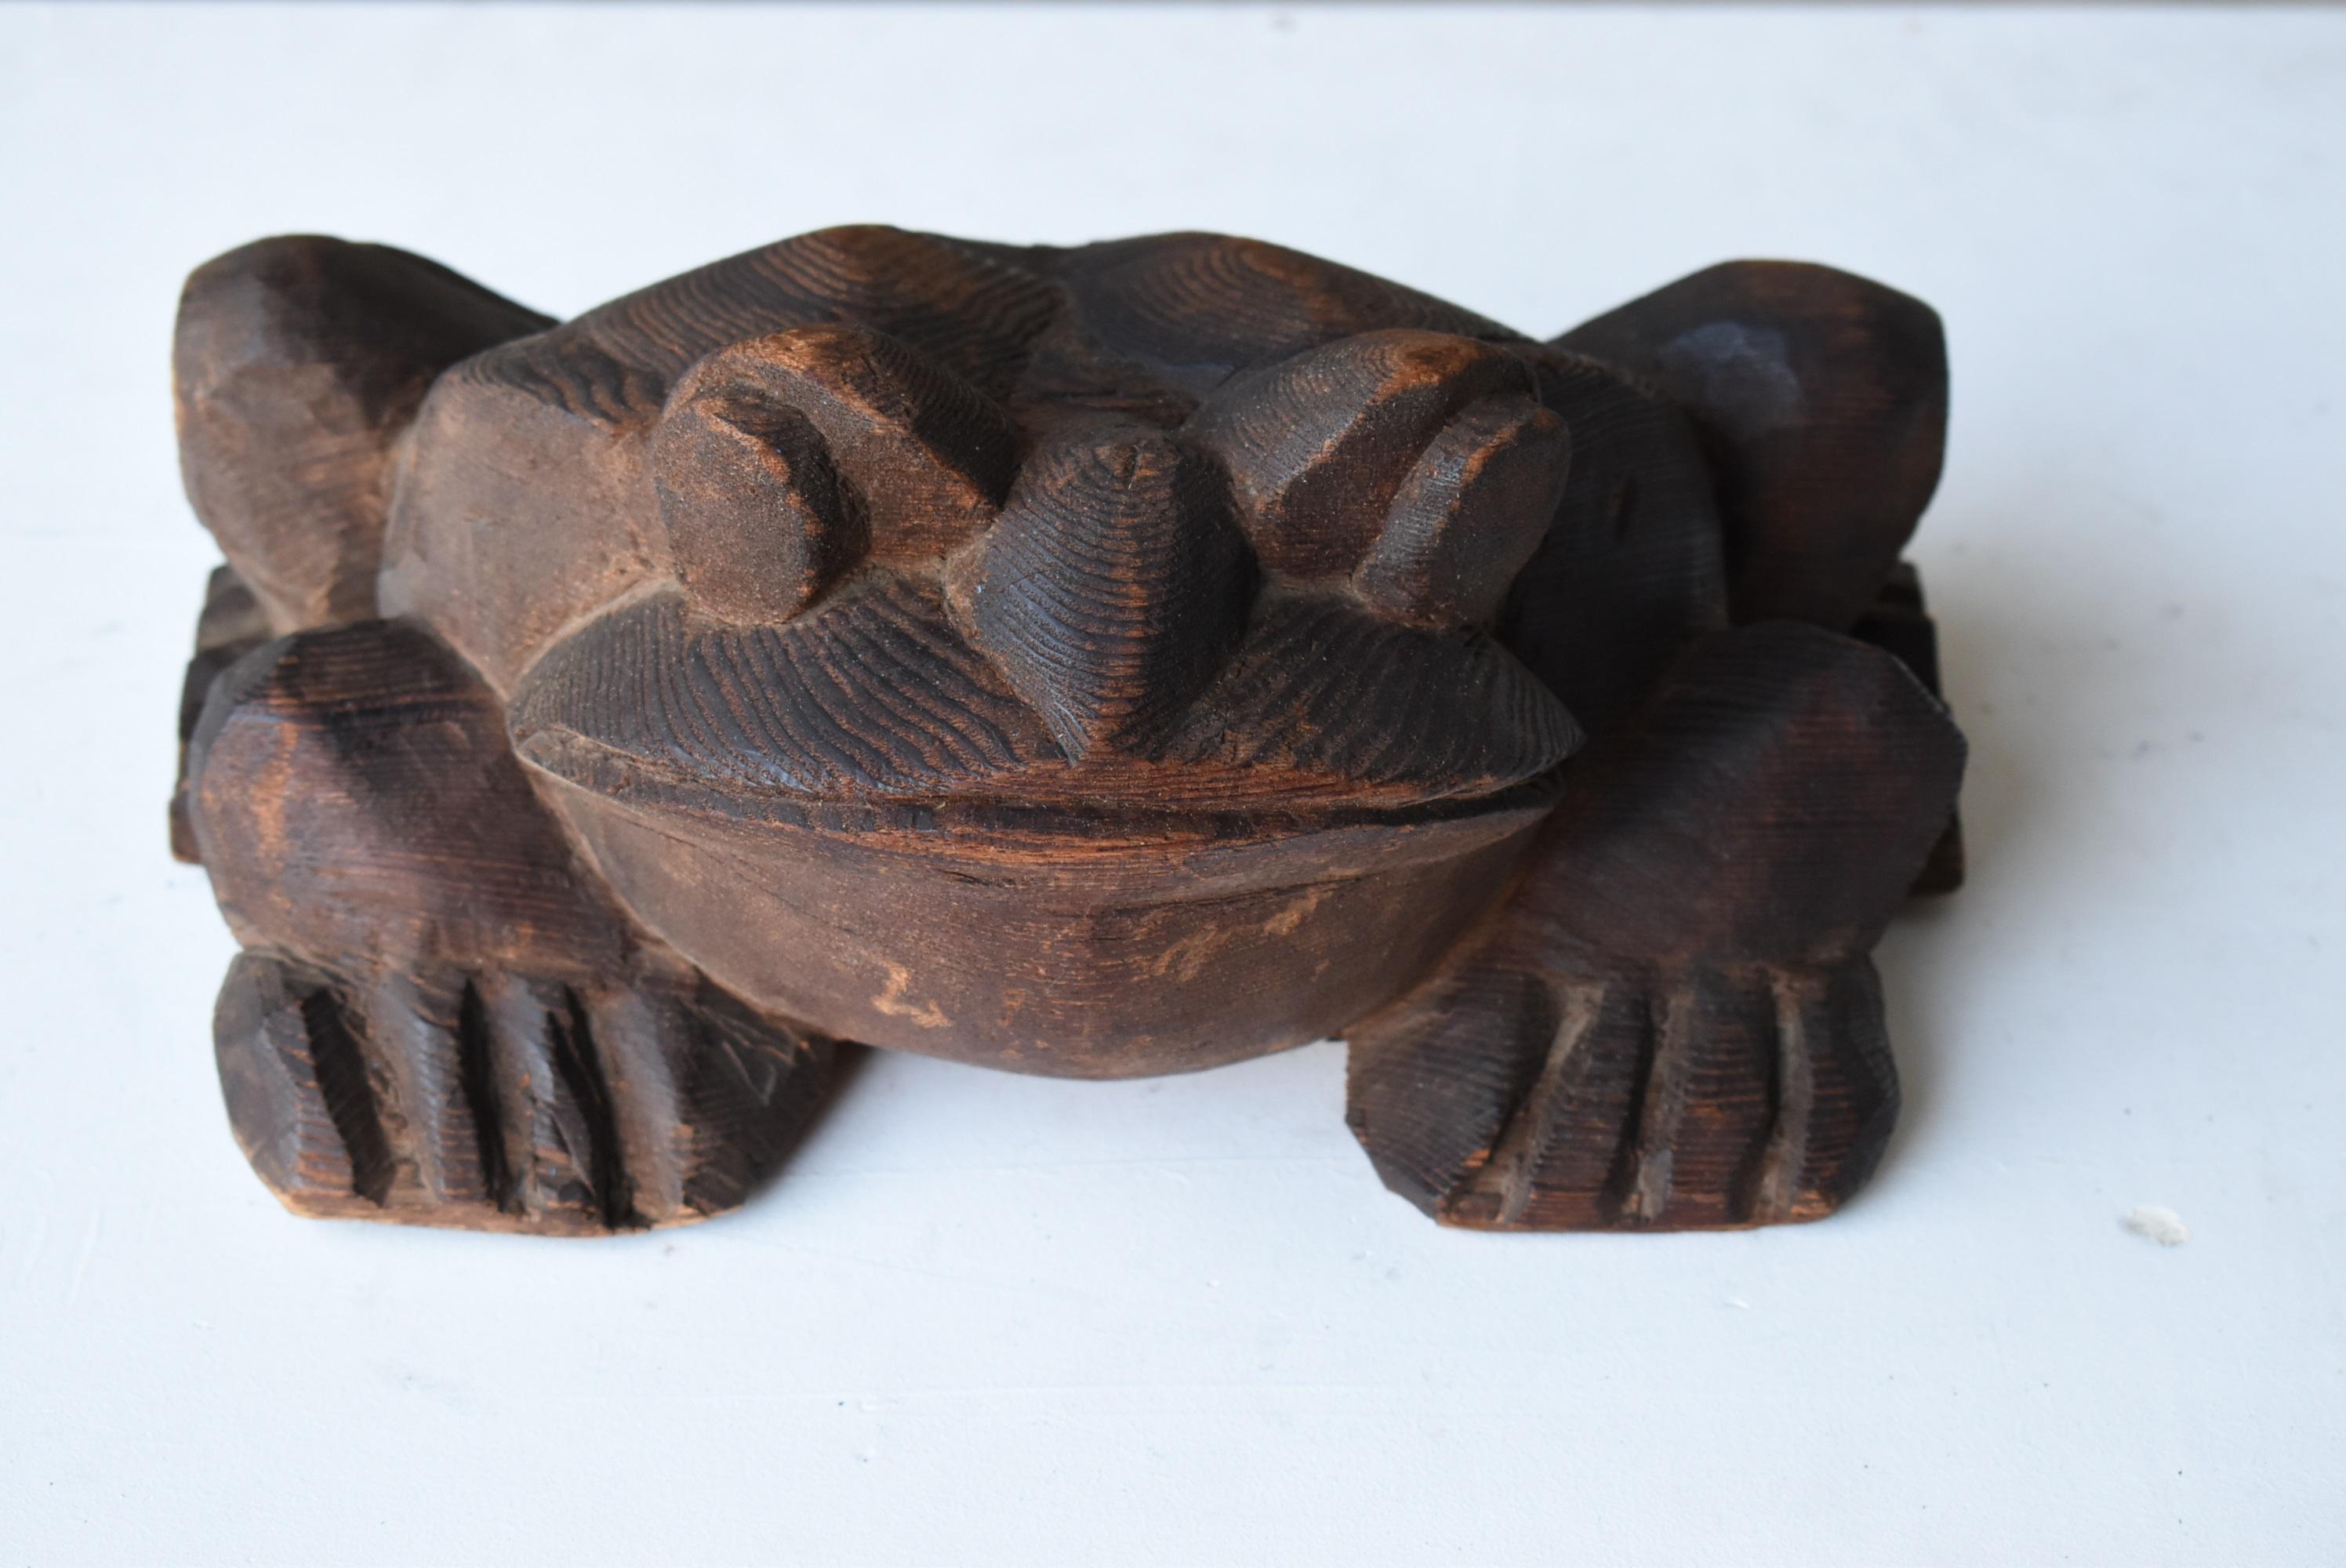 This is an old Japanese wood carving of a frog.
It is an early Showa era item. (1900s-1930s).
It is made of chestnut wood.

In Japan, frogs are considered to be good luck charms.
This seems to have been enshrined as a guardian deity.
This is